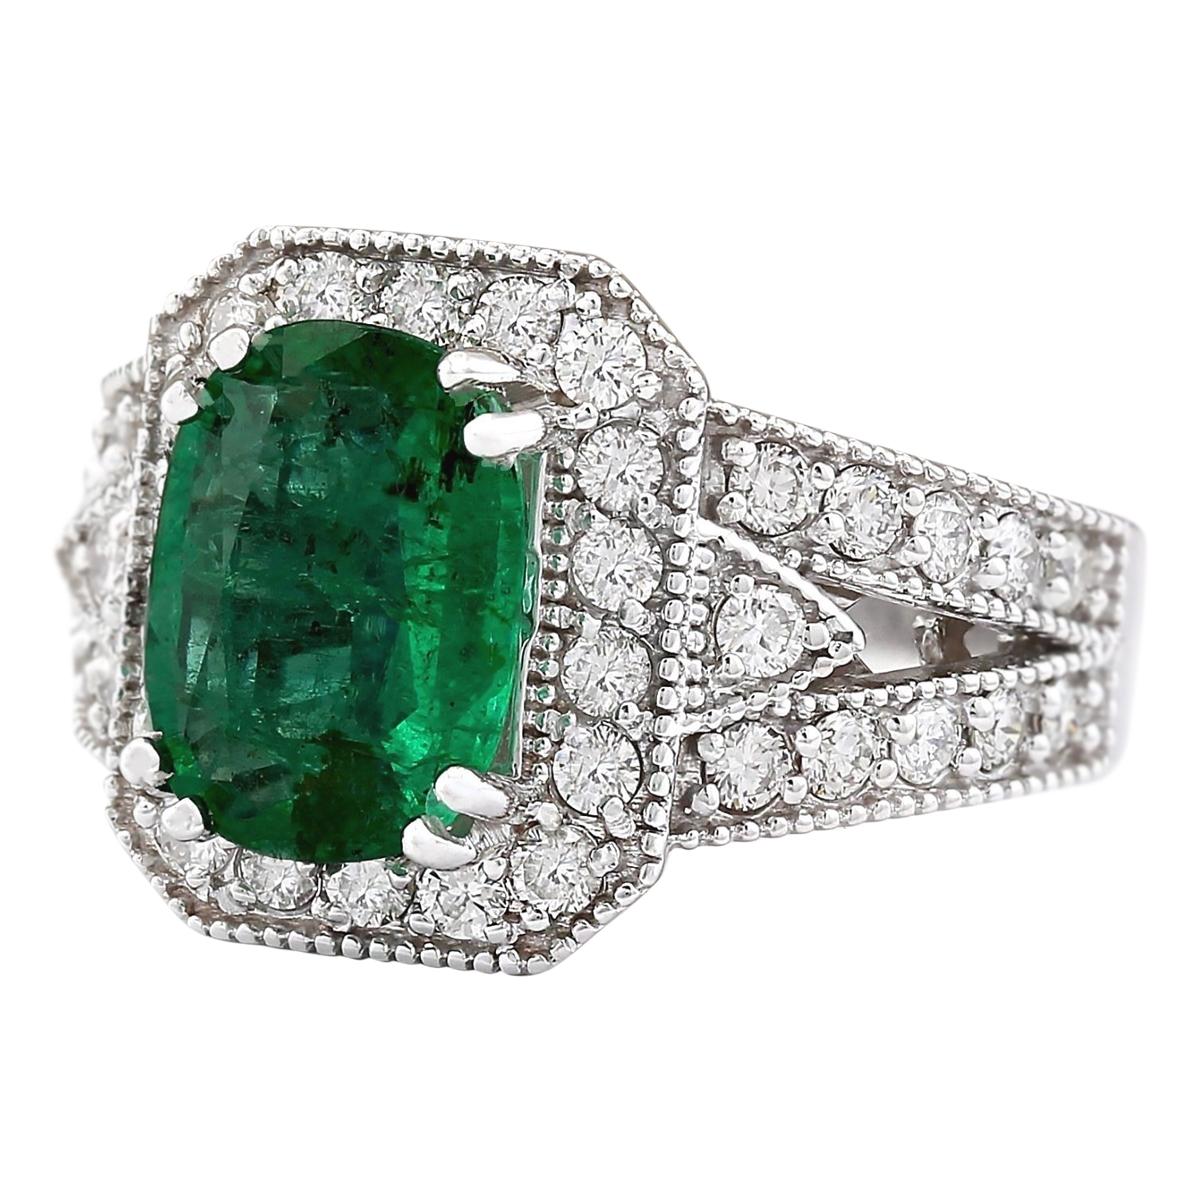 3.38 Carat Natural Emerald 14 Karat White Gold Diamond Ring
Stamped: 14K White Gold
Total Ring Weight: 7.8 Grams
Emerald Weight is 2.38 Carat (Measures: 10.00x8.00 mm)
Diamond Weight is 1.00 Carat
Color: F-G, Clarity: VS2-SI1
Face Measures: